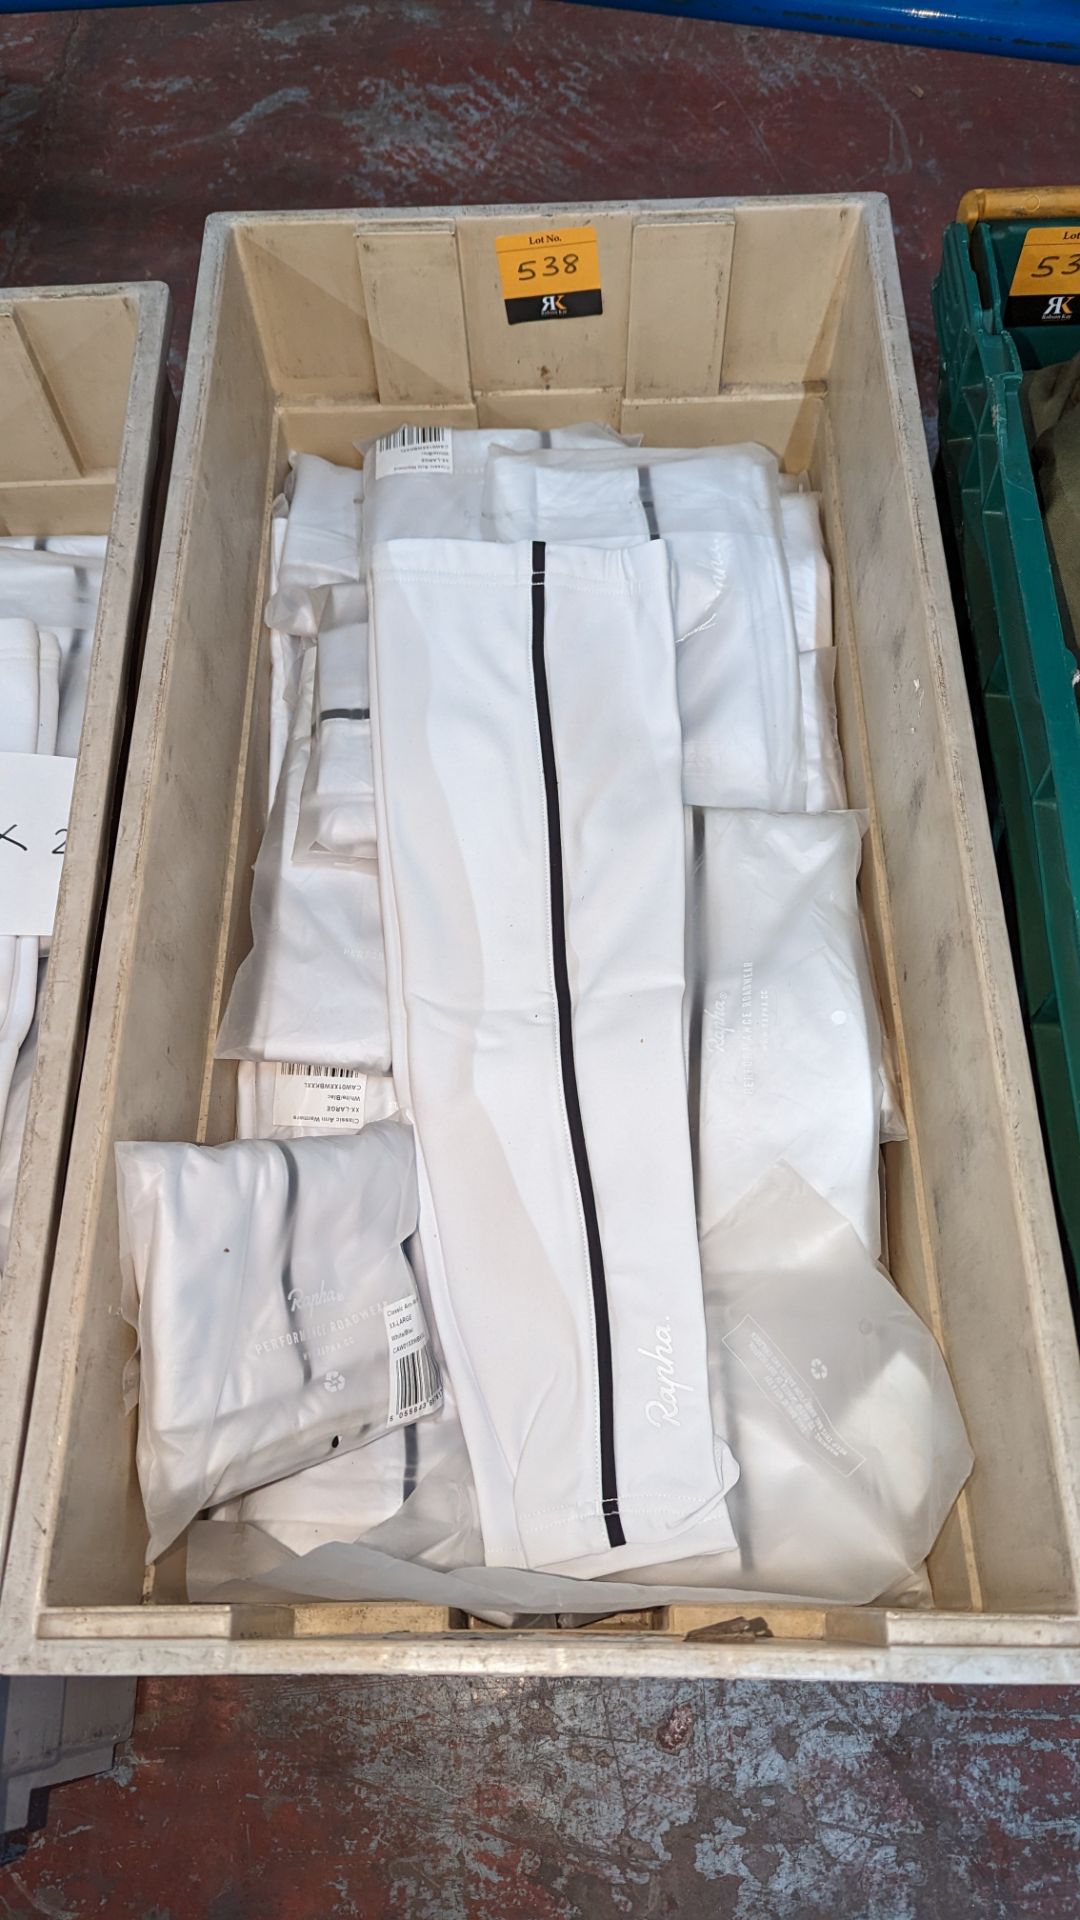 24 pairs of Rapha Cycling ladies arm warmers, in white with black detailing. These mostly appear to